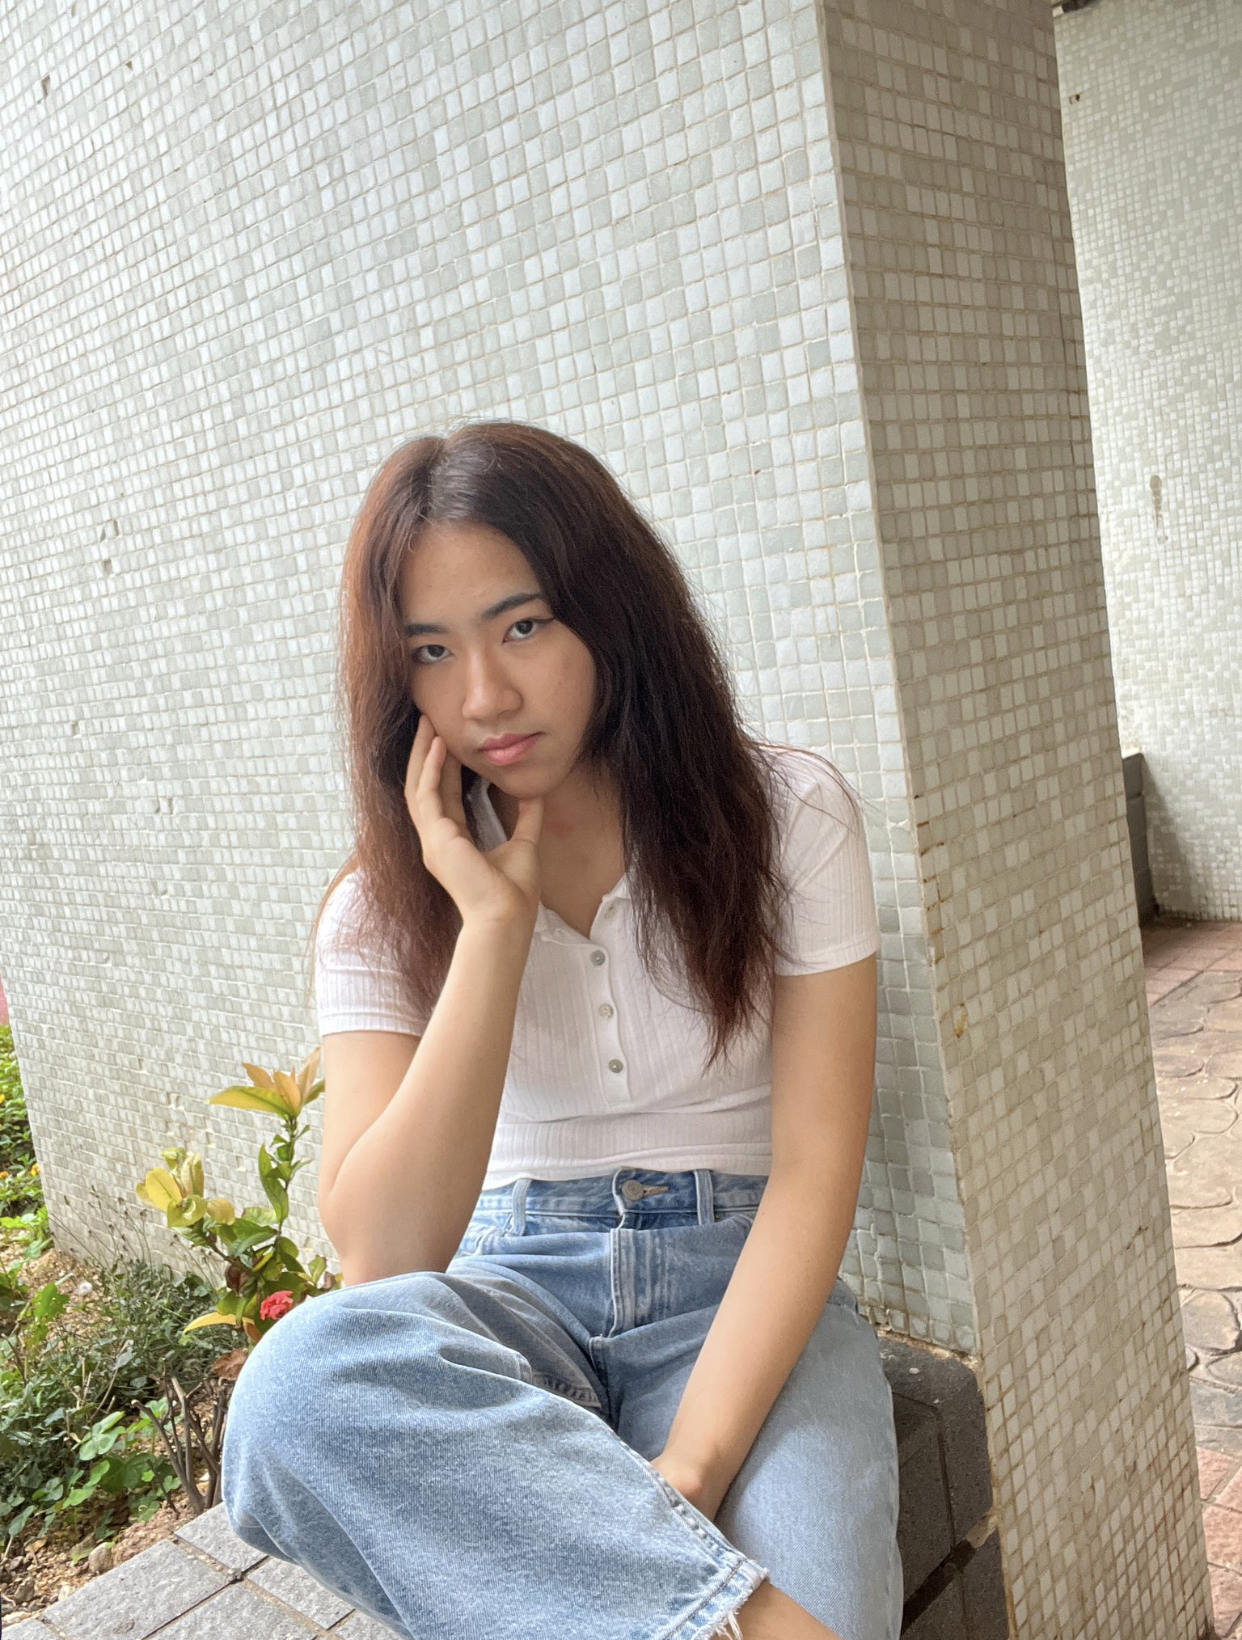 A portrait of Liana Tang, an Asian teen girl, sitting against a tiled wall.